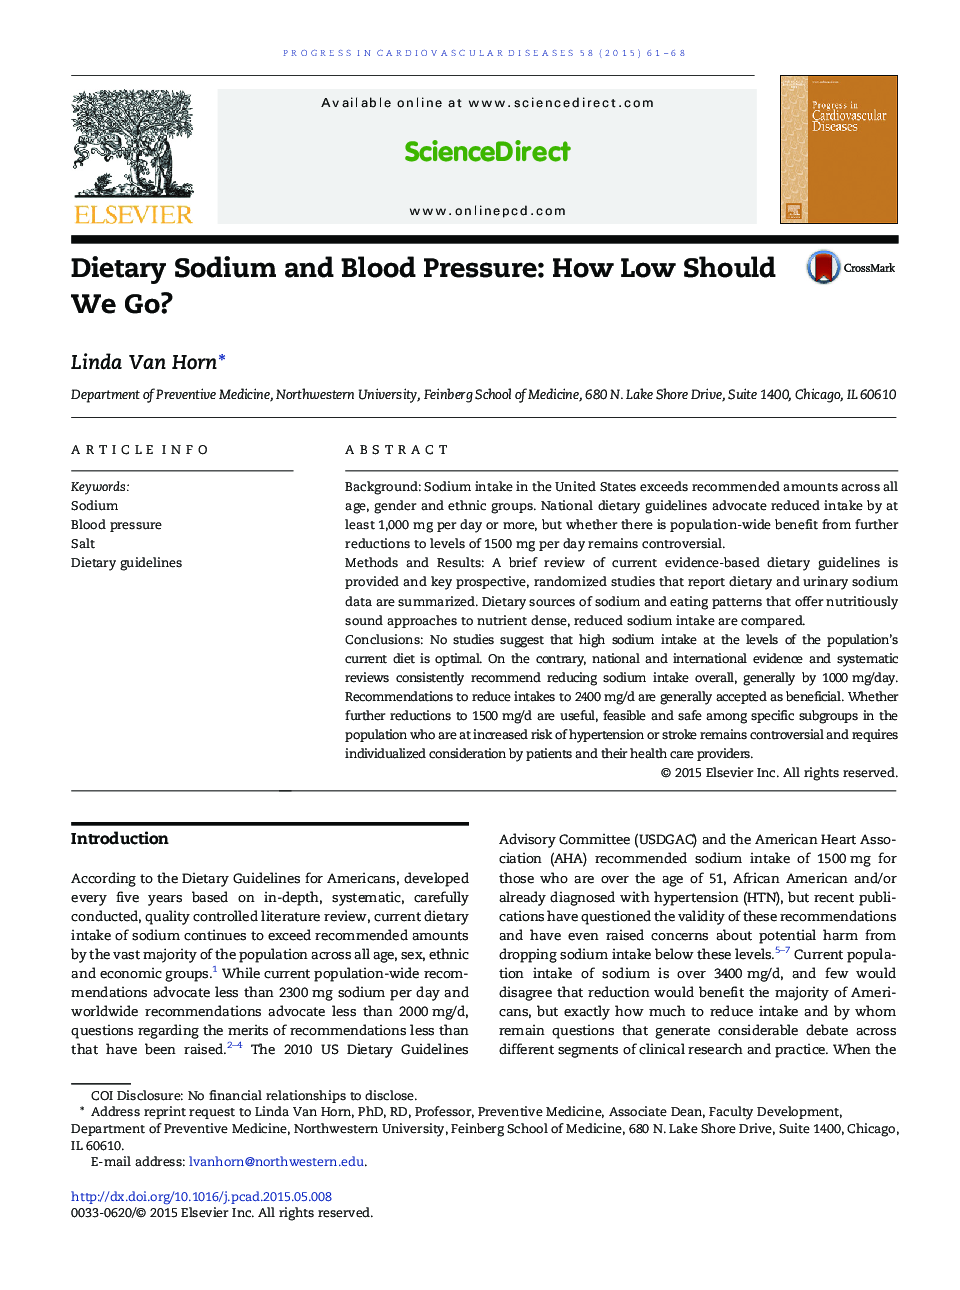 Dietary Sodium and Blood Pressure: How Low Should We Go? 